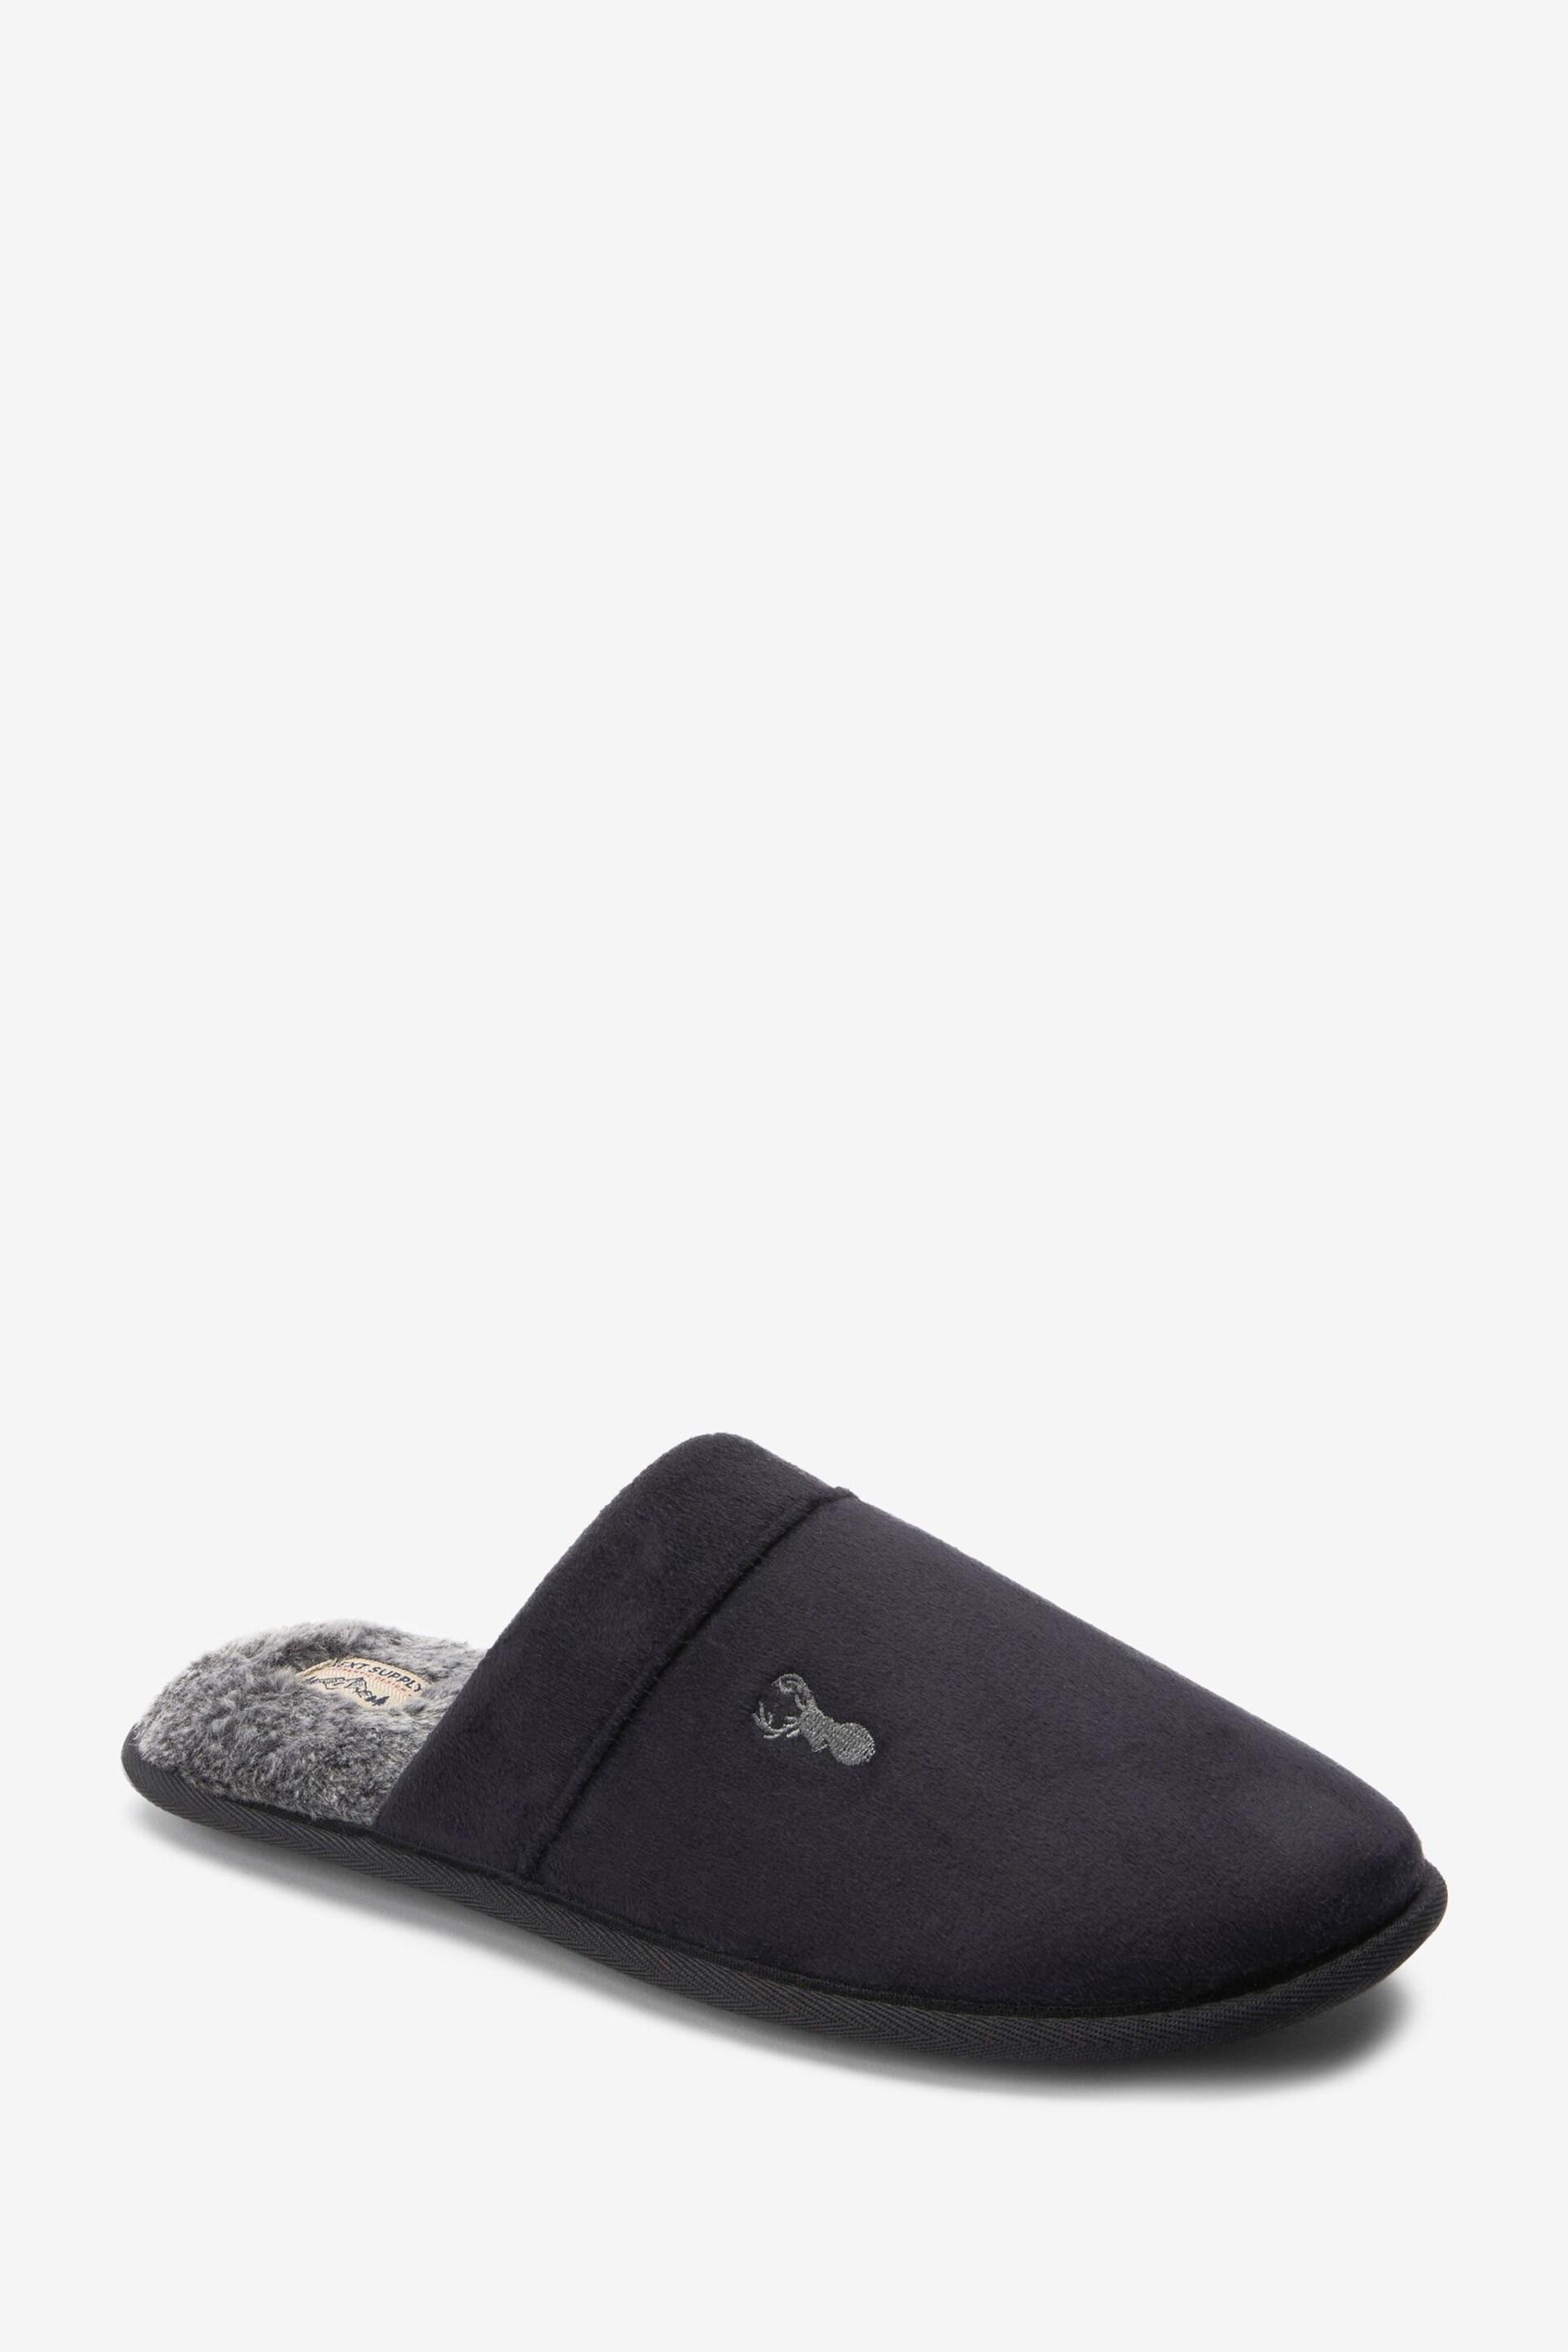 Black Stag Faux Fur Lined Mule Slippers - Image 3 of 5